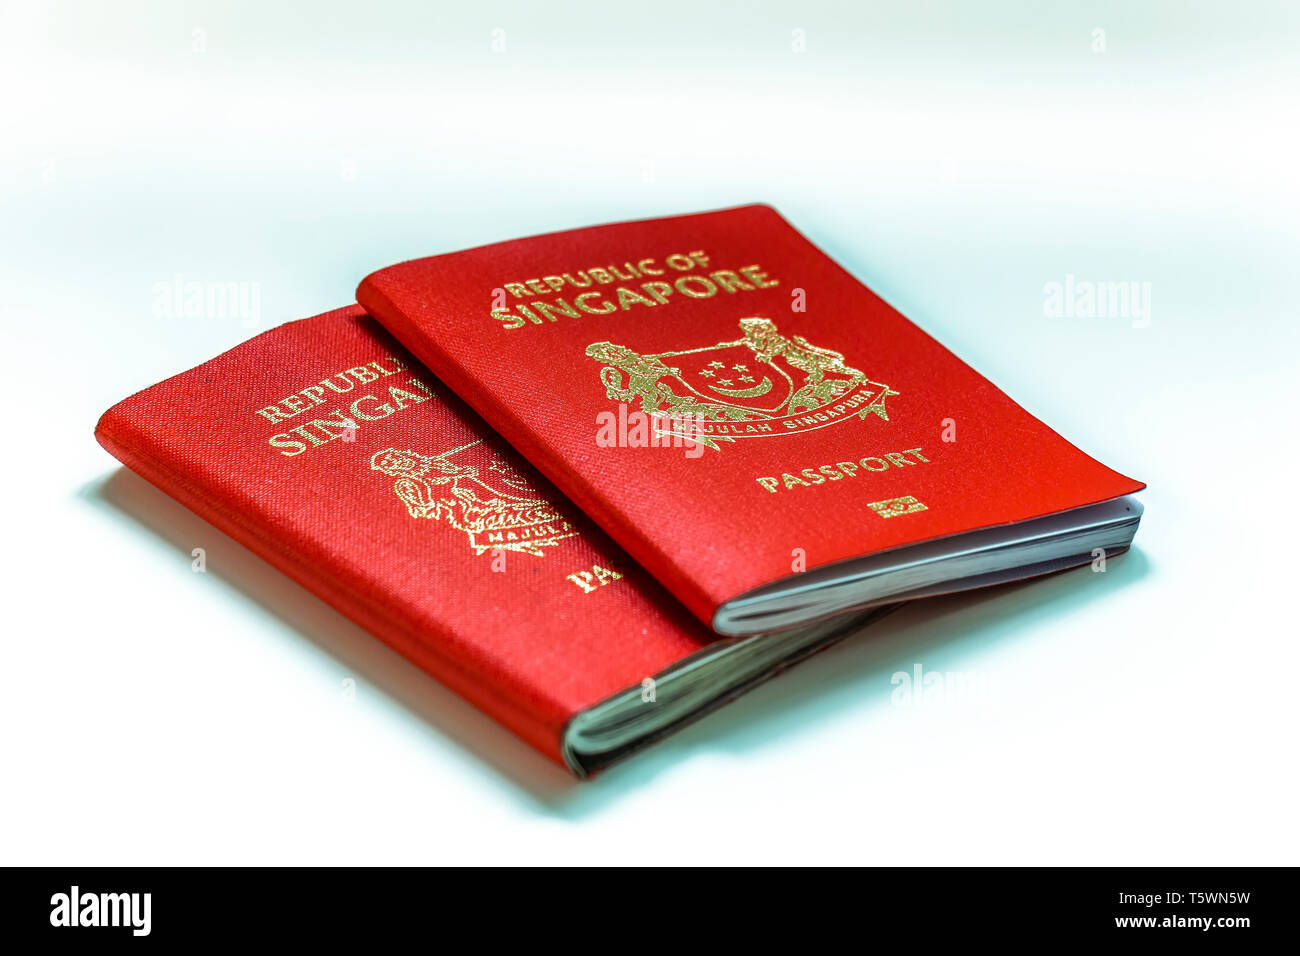 Singapore passport is ranked the most powerful passport in the world with visa-free or visa on arrival access to 189 countries, in conjuction with the Stock Photo